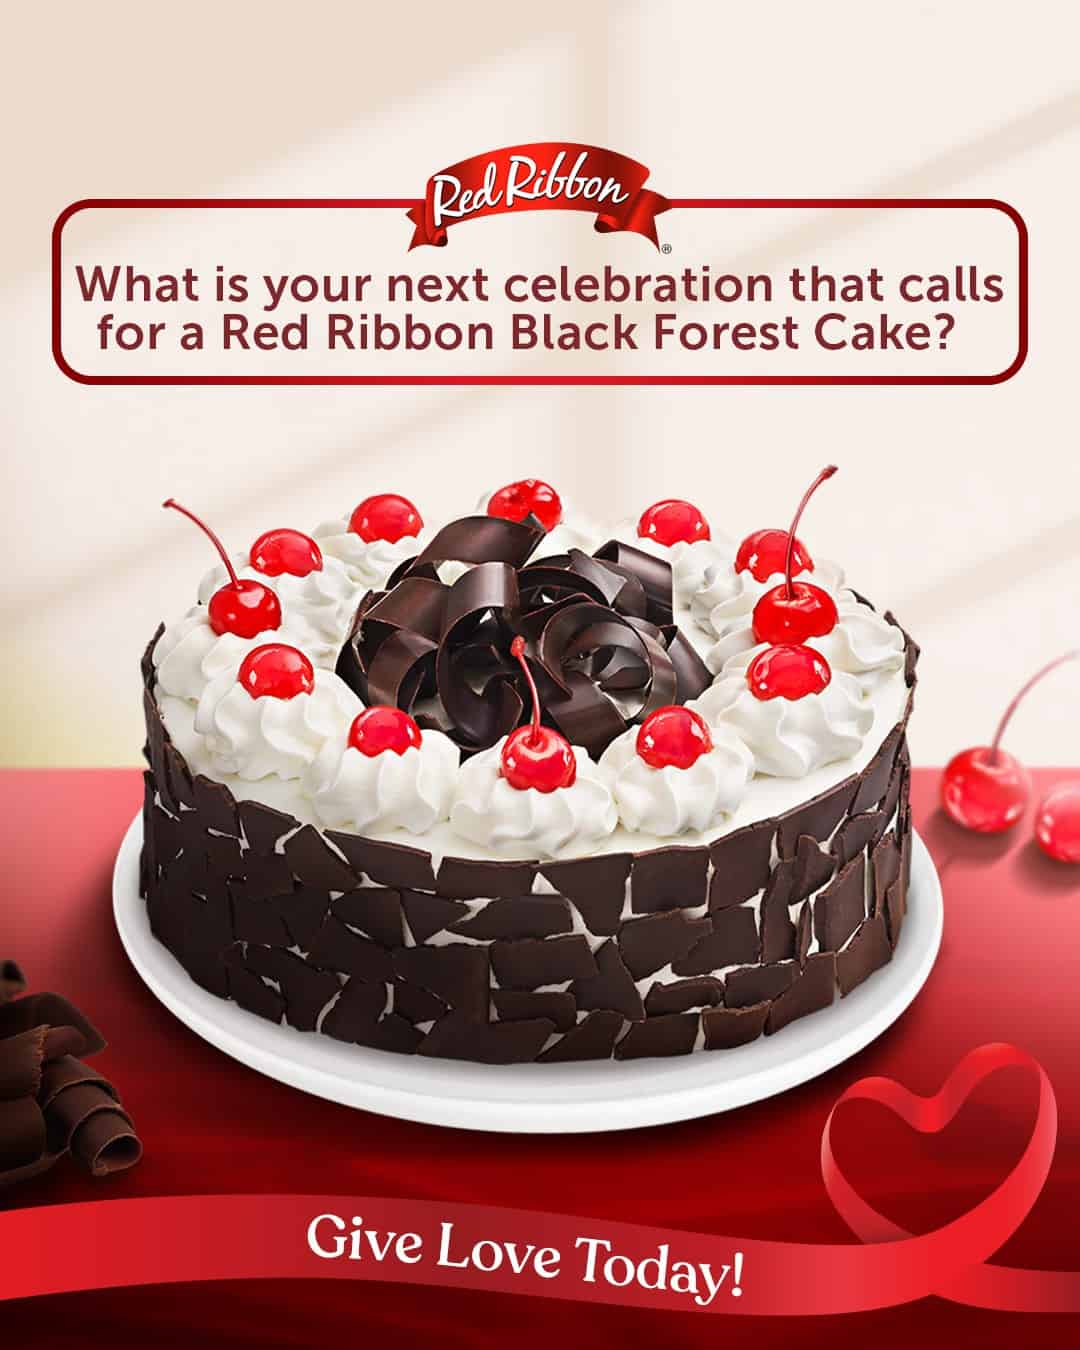 Black Forest Cake on Red Ribbon Menu Philippines